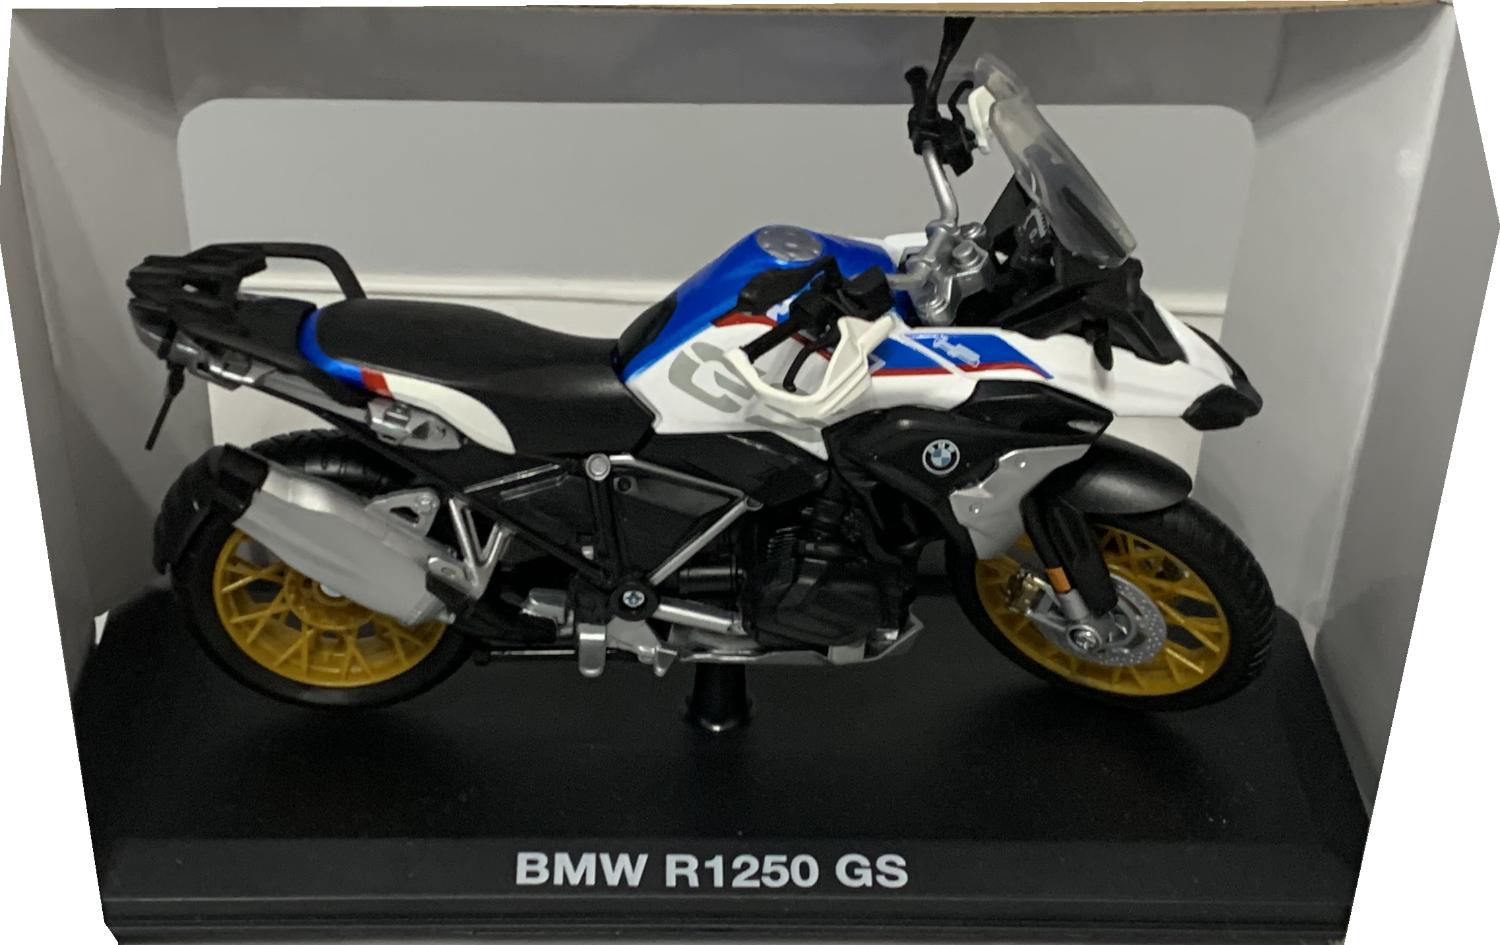 A good scale model of a BMW R1250 GS decorated in grey, white and blue with authentic graphics.